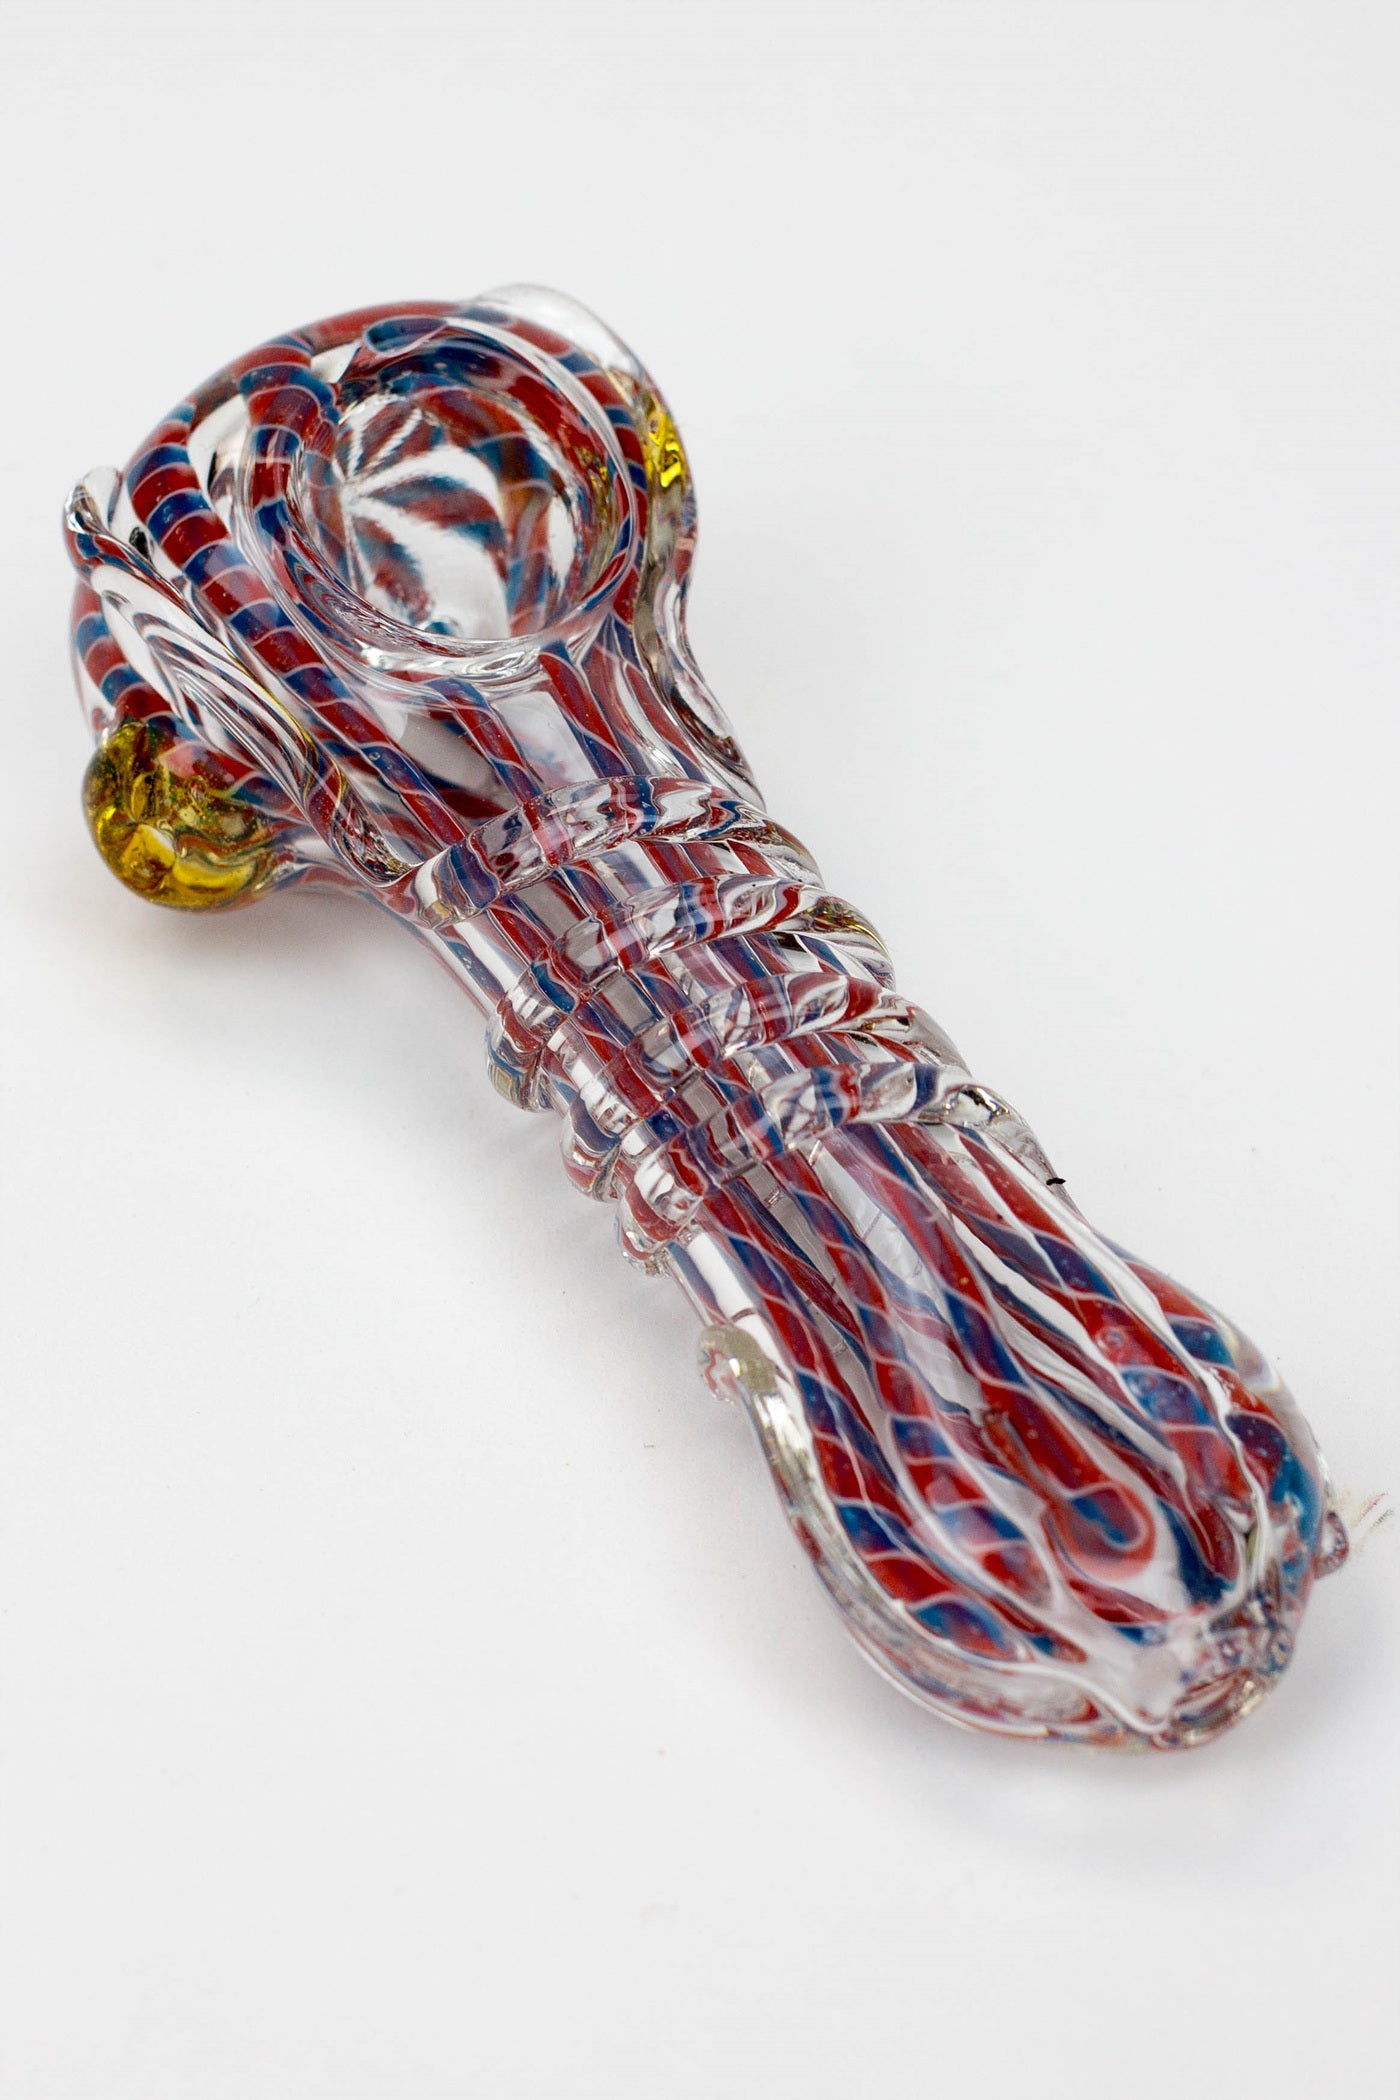 4.5" soft glass 8560 hand pipe - 127_3